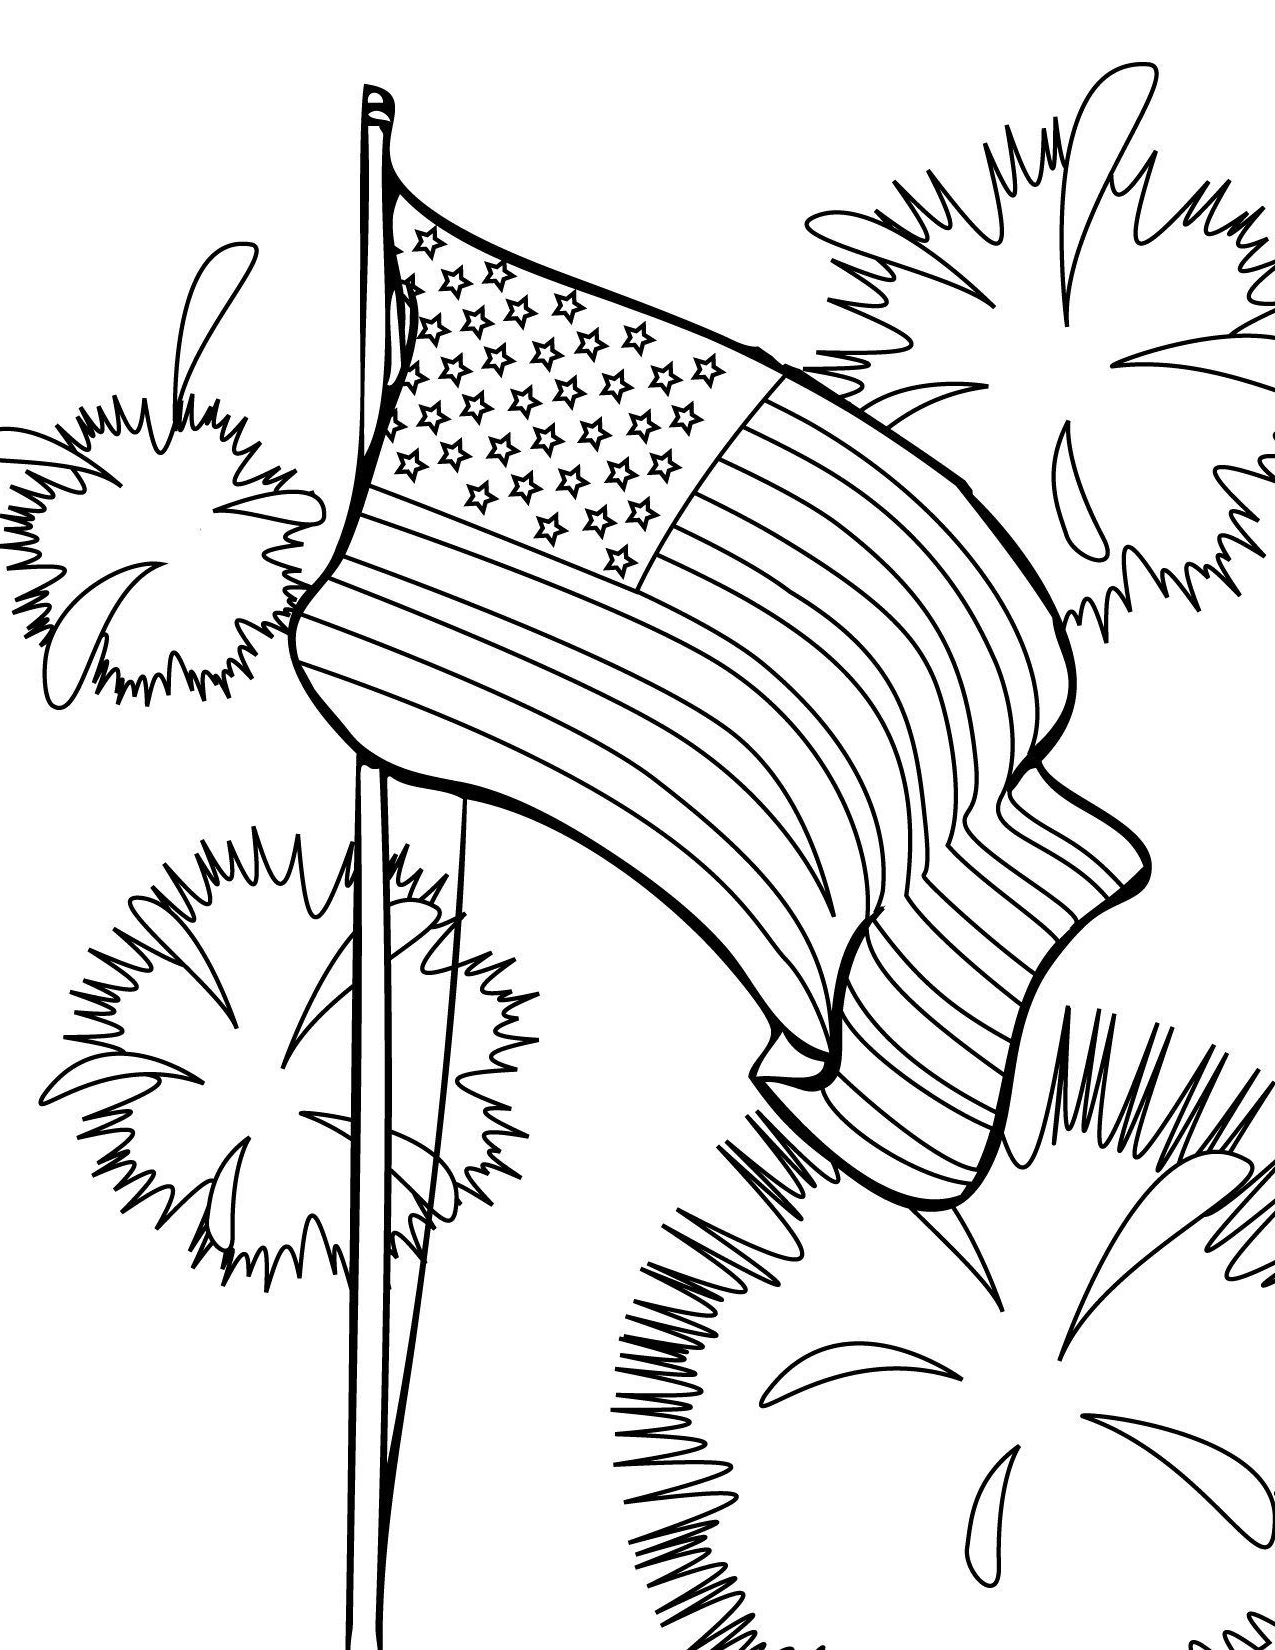 flag-day-coloring-pages-best-coloring-pages-for-kids